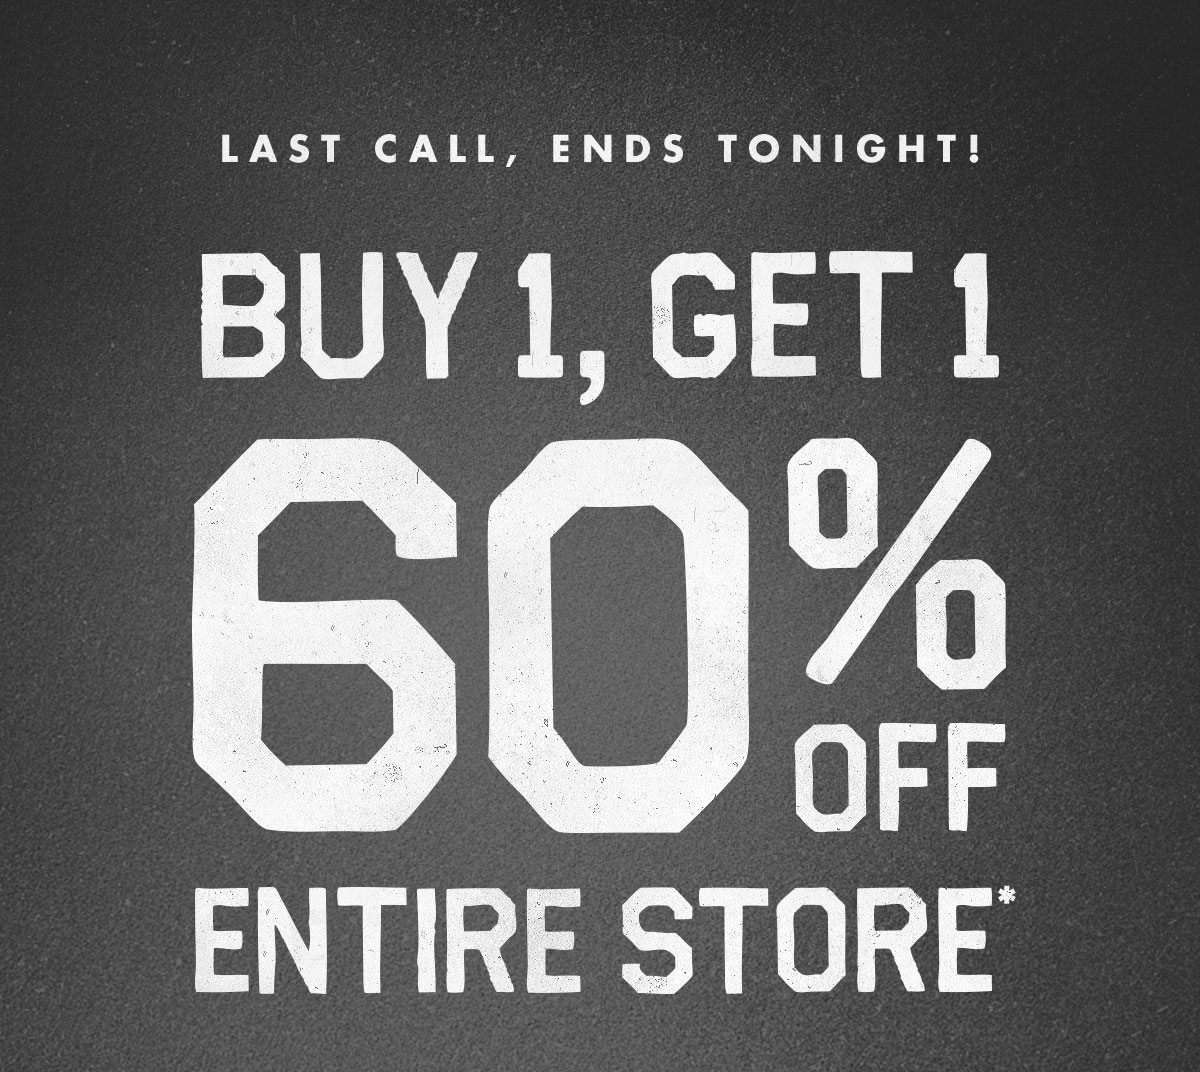 Last call, ends tonight! Buy 1, get 1 60% off entire store*